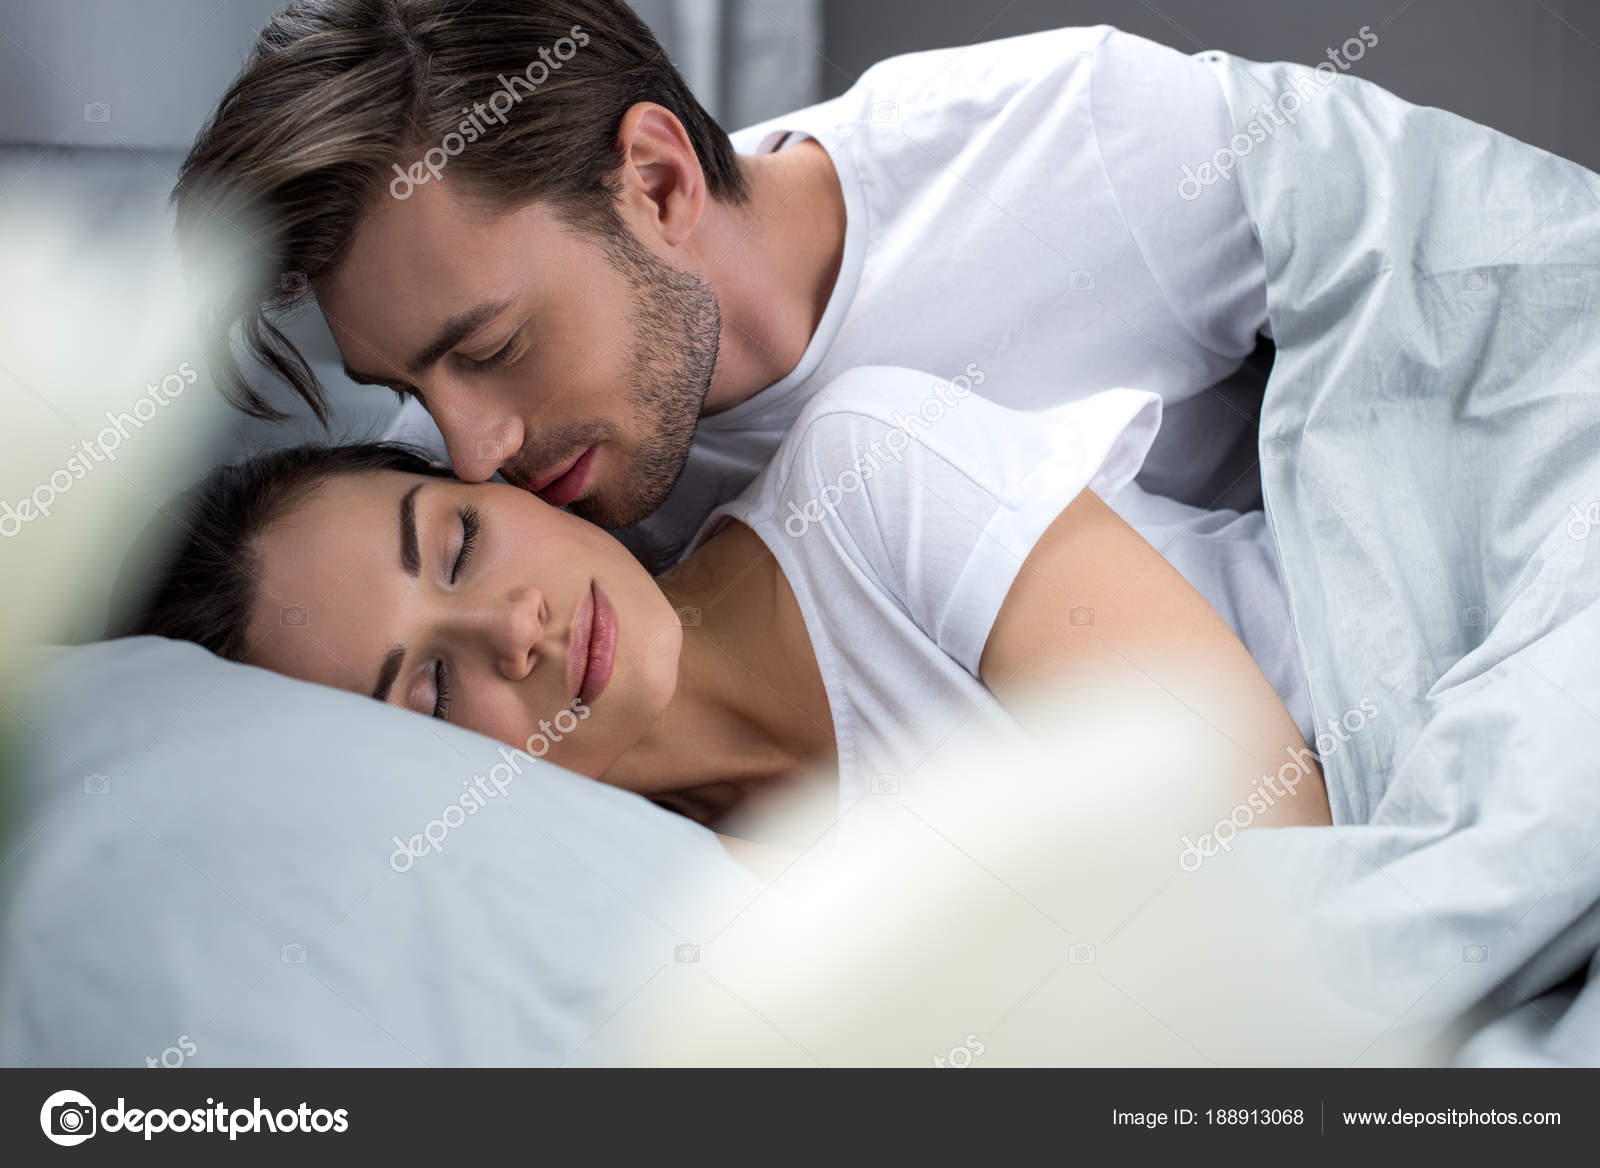 Image result for husband and wife in bed